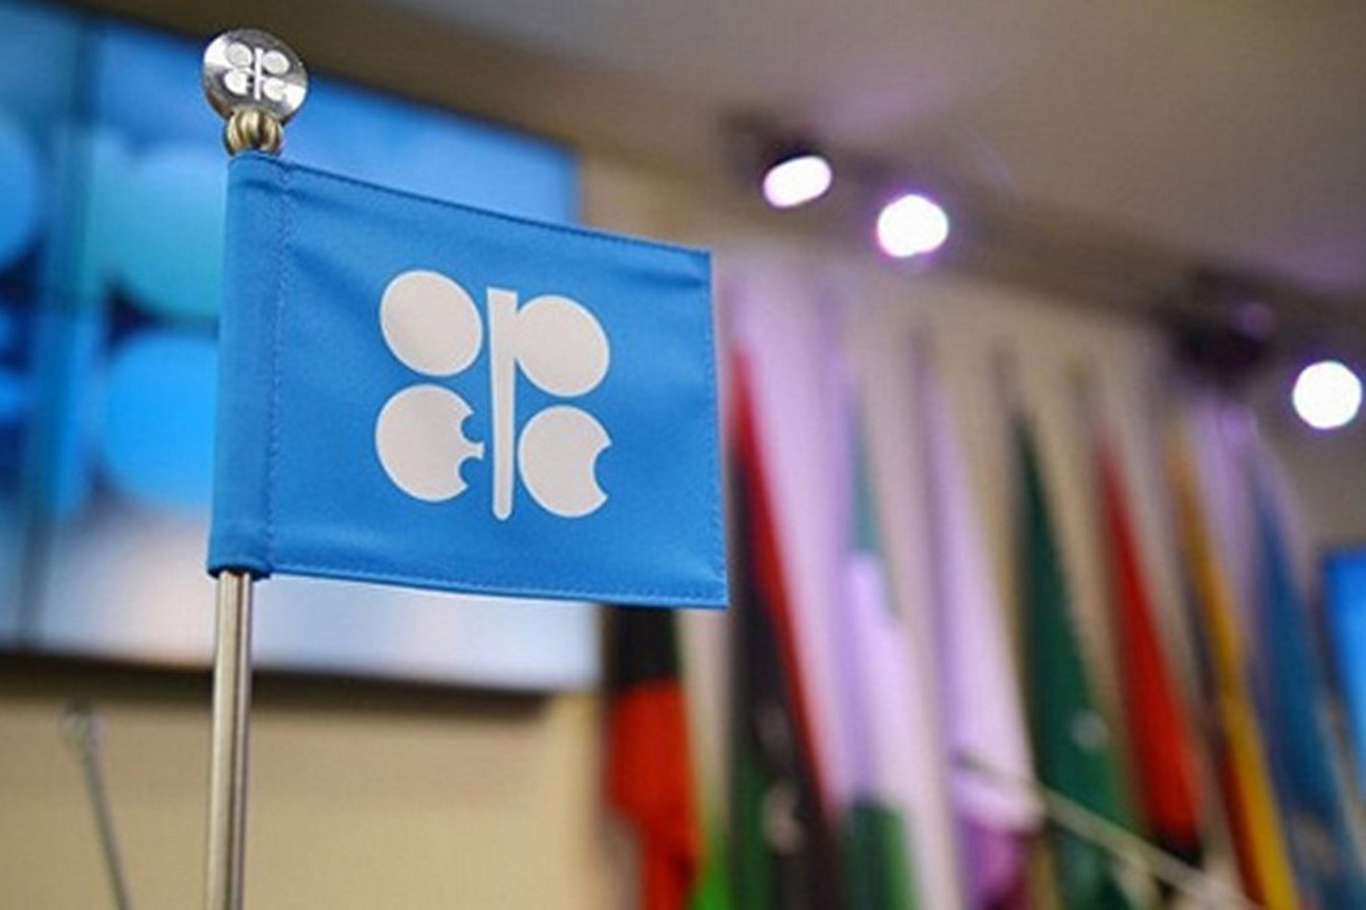 OPEC and Russia agree to raise oil supply from January 2021